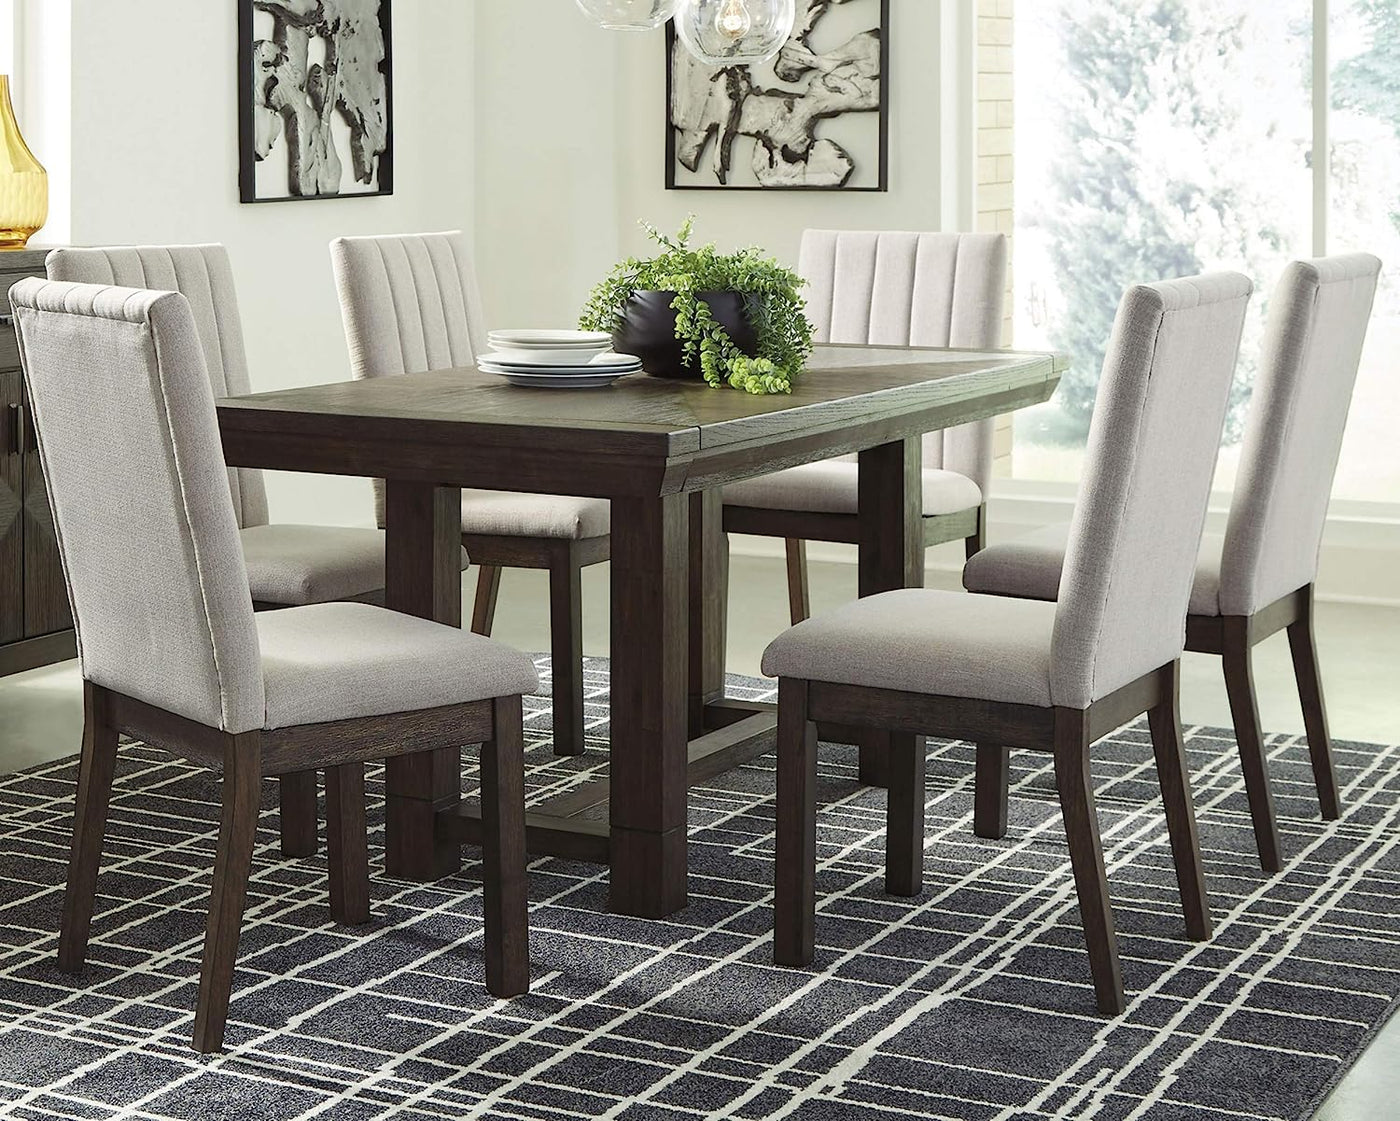 Signature Design by Ashley Dellbeck Casual Rectangular Dining Extension Table - $410